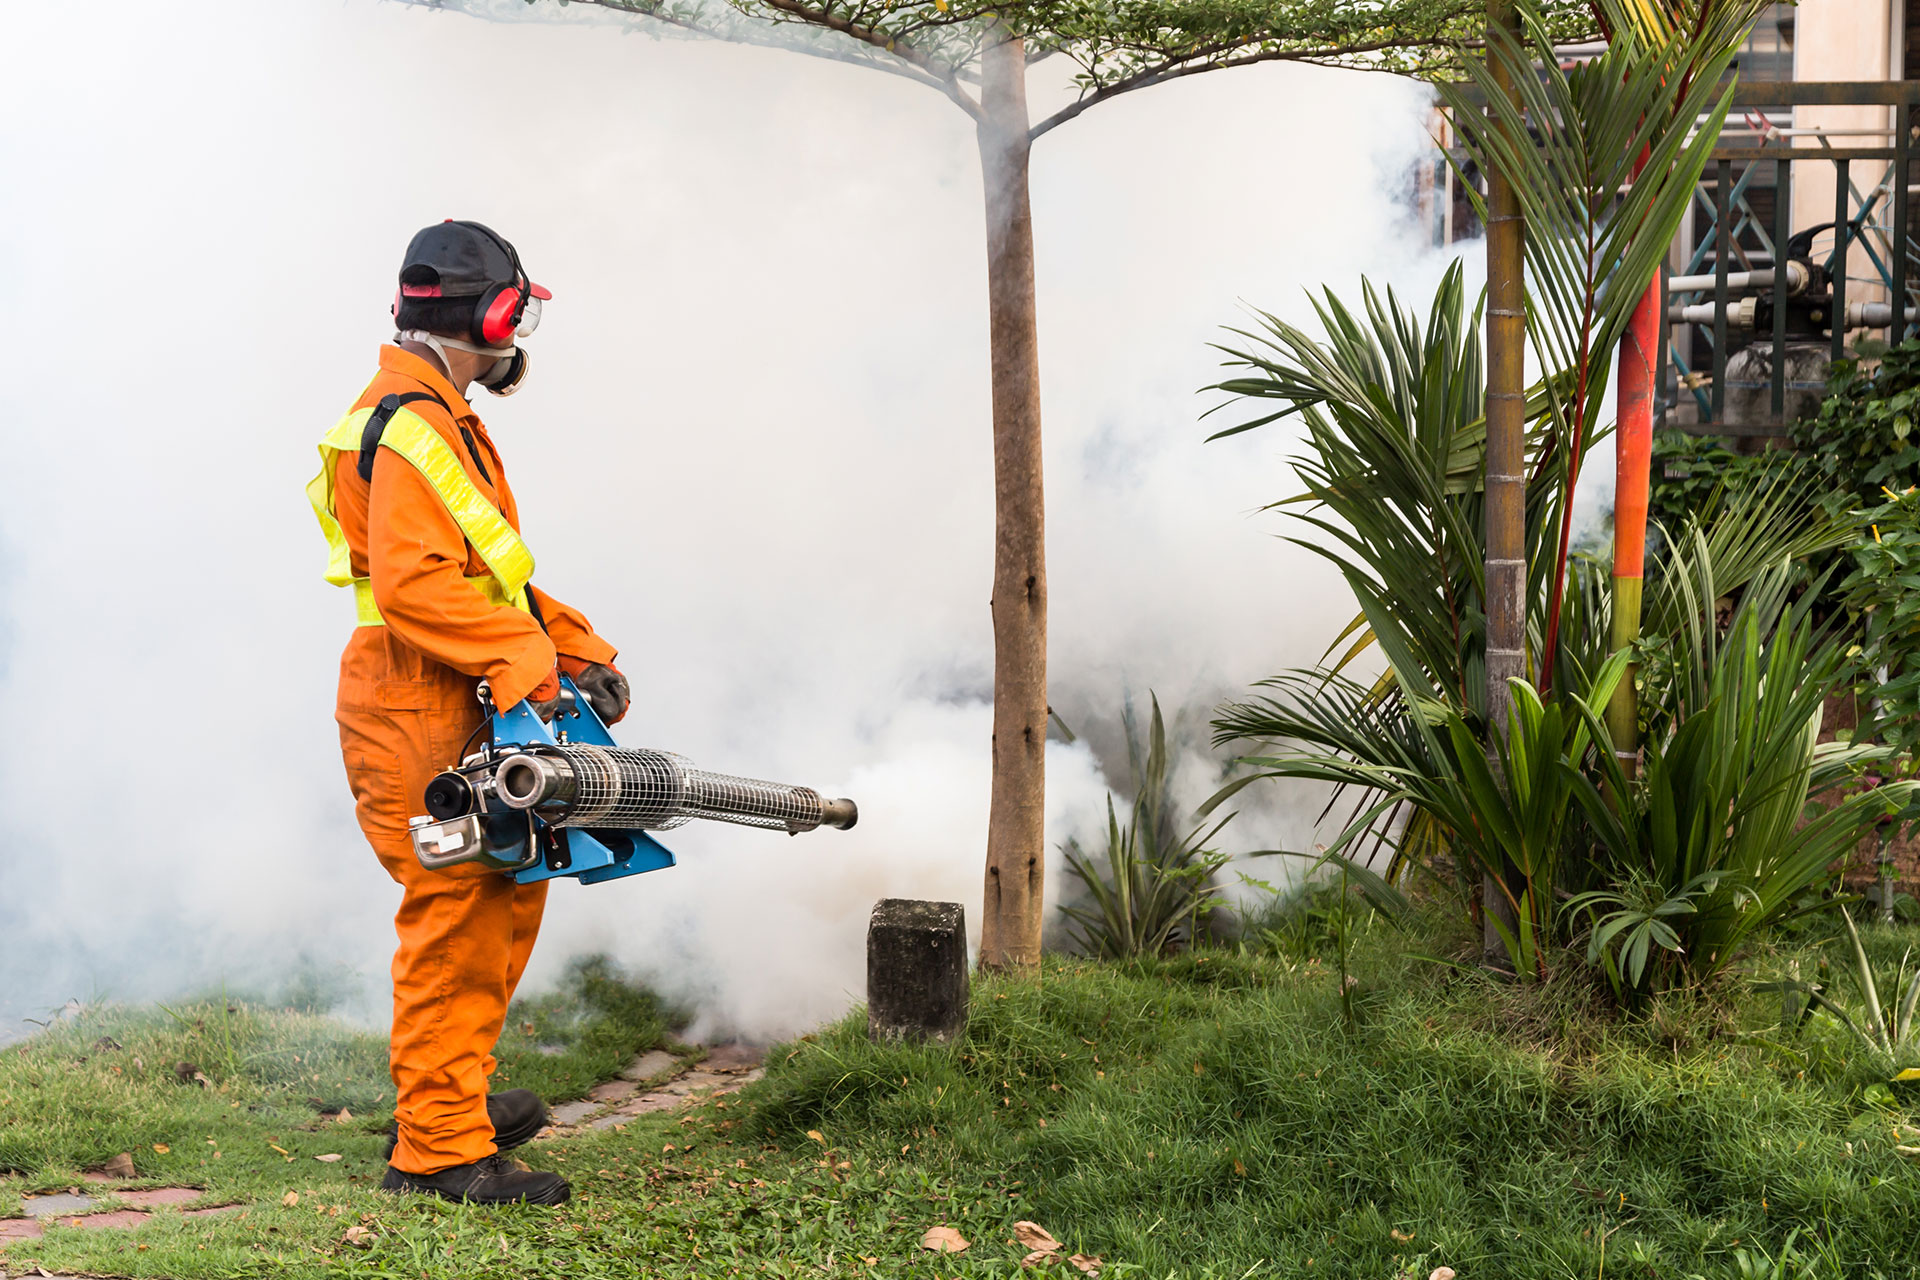 worker-fogging-residential-area-with-insecticides-2021-09-01-21-14-56-P4FQB4D.jpg